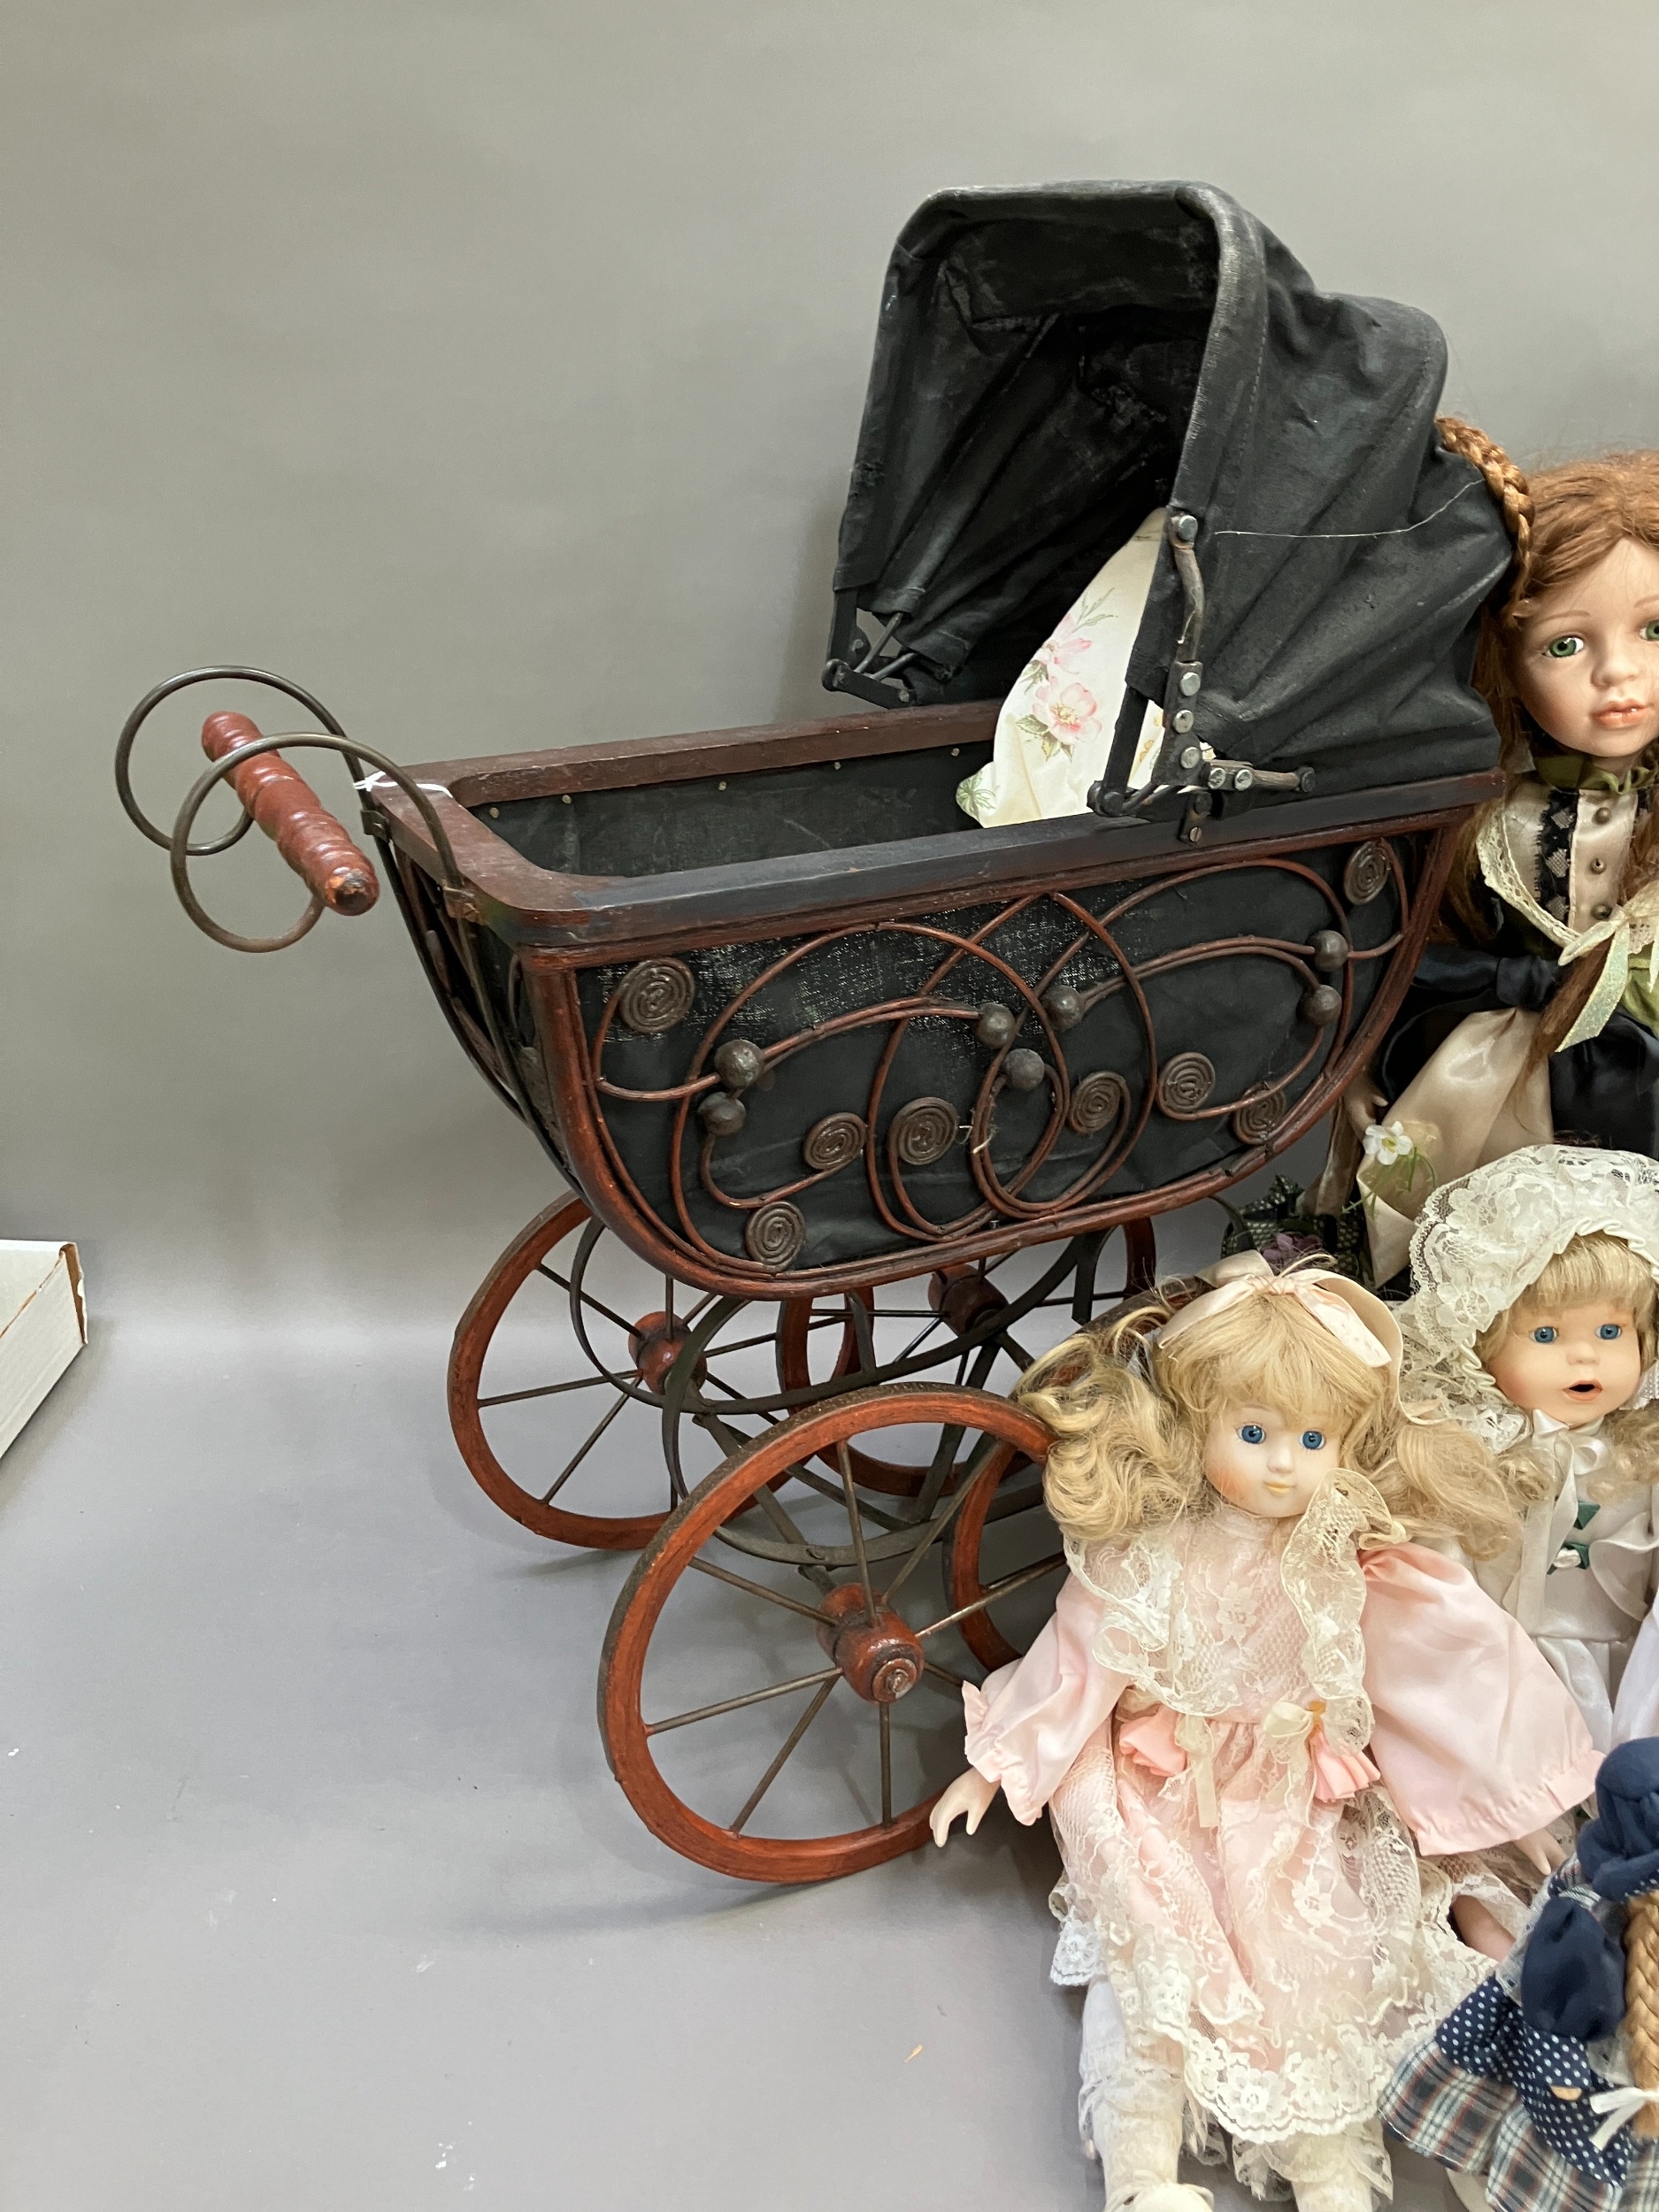 A collection of six modern porcelain dolls in costume, together with two Victorian style prams - Image 3 of 4